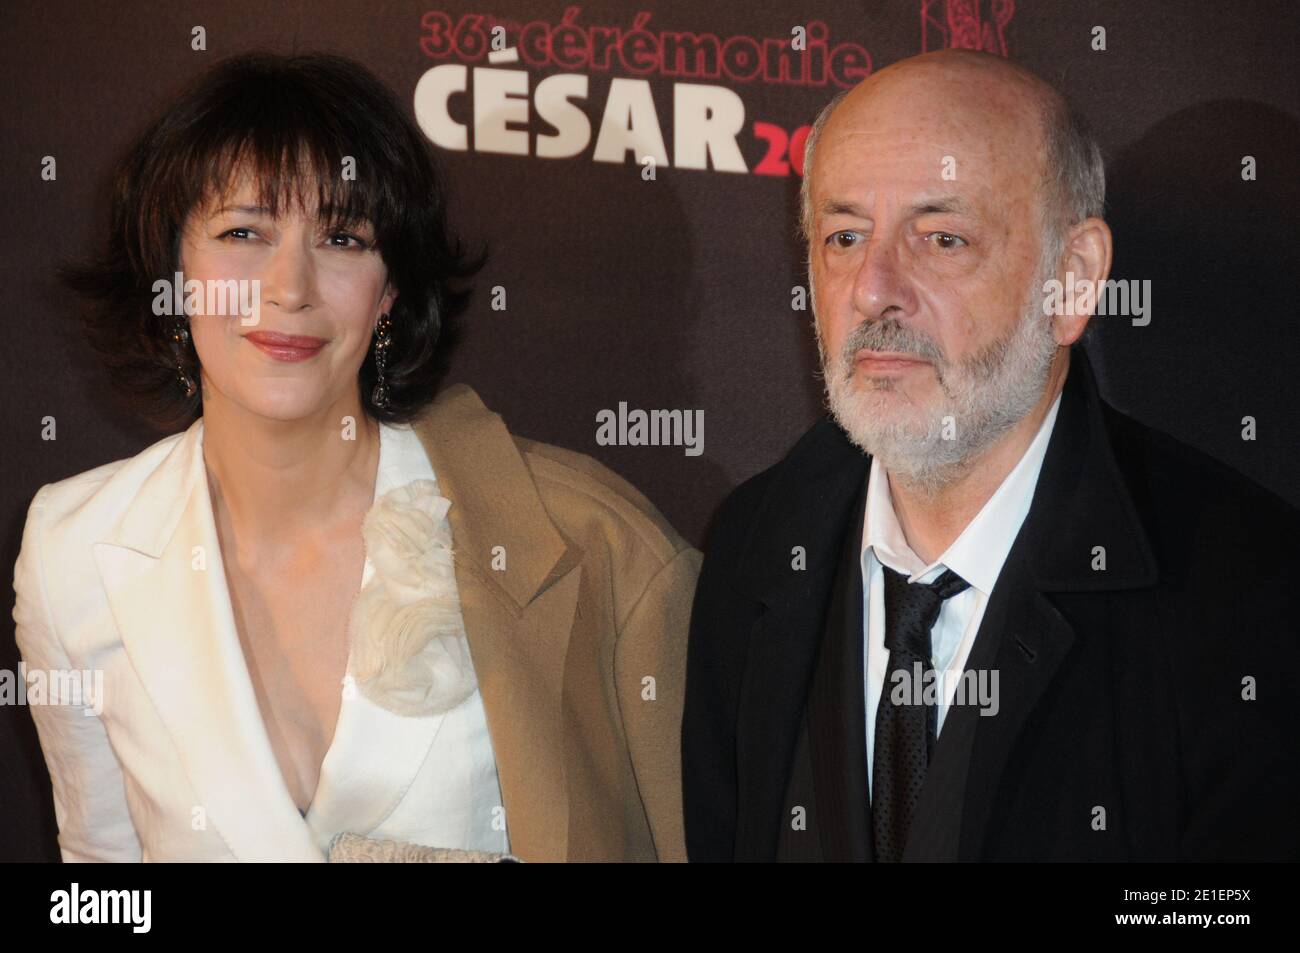 Anne Alvaro and Bertrand Blier arriving to the 36th annual Cesar Awards ceremony held at the Theatre du Chatelet in Paris, France on February 25, 2011. Photo by Mireille Ampilhac/ABACAPRESS.COM Stock Photo